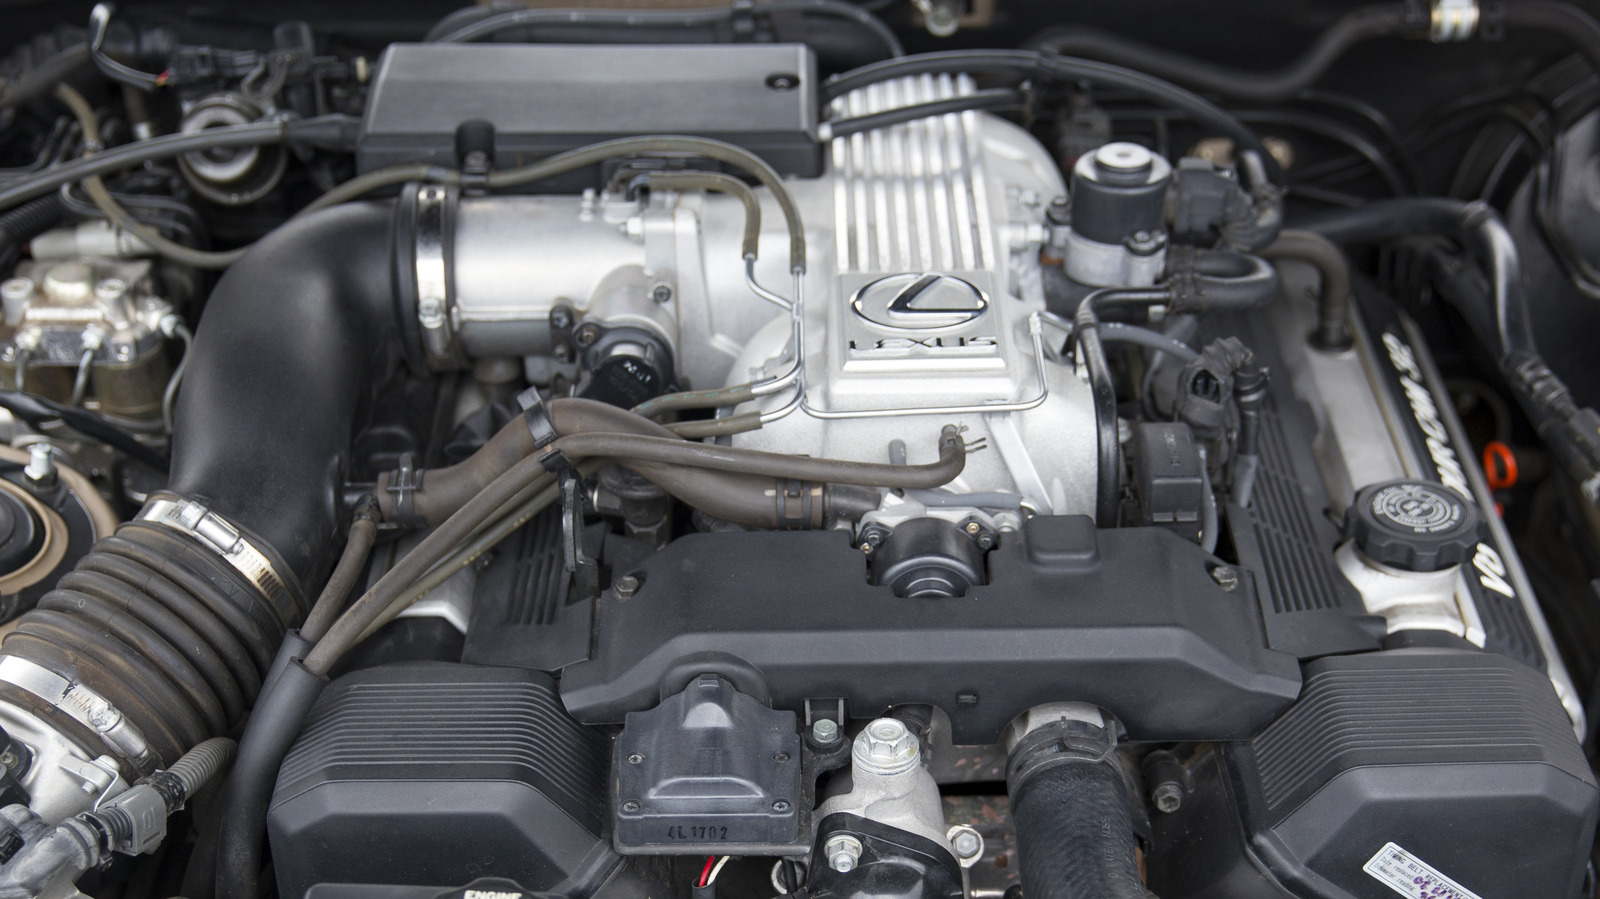 1UZ Vs. 2UZ: What's The Difference Between These Toyota V8 Engines?